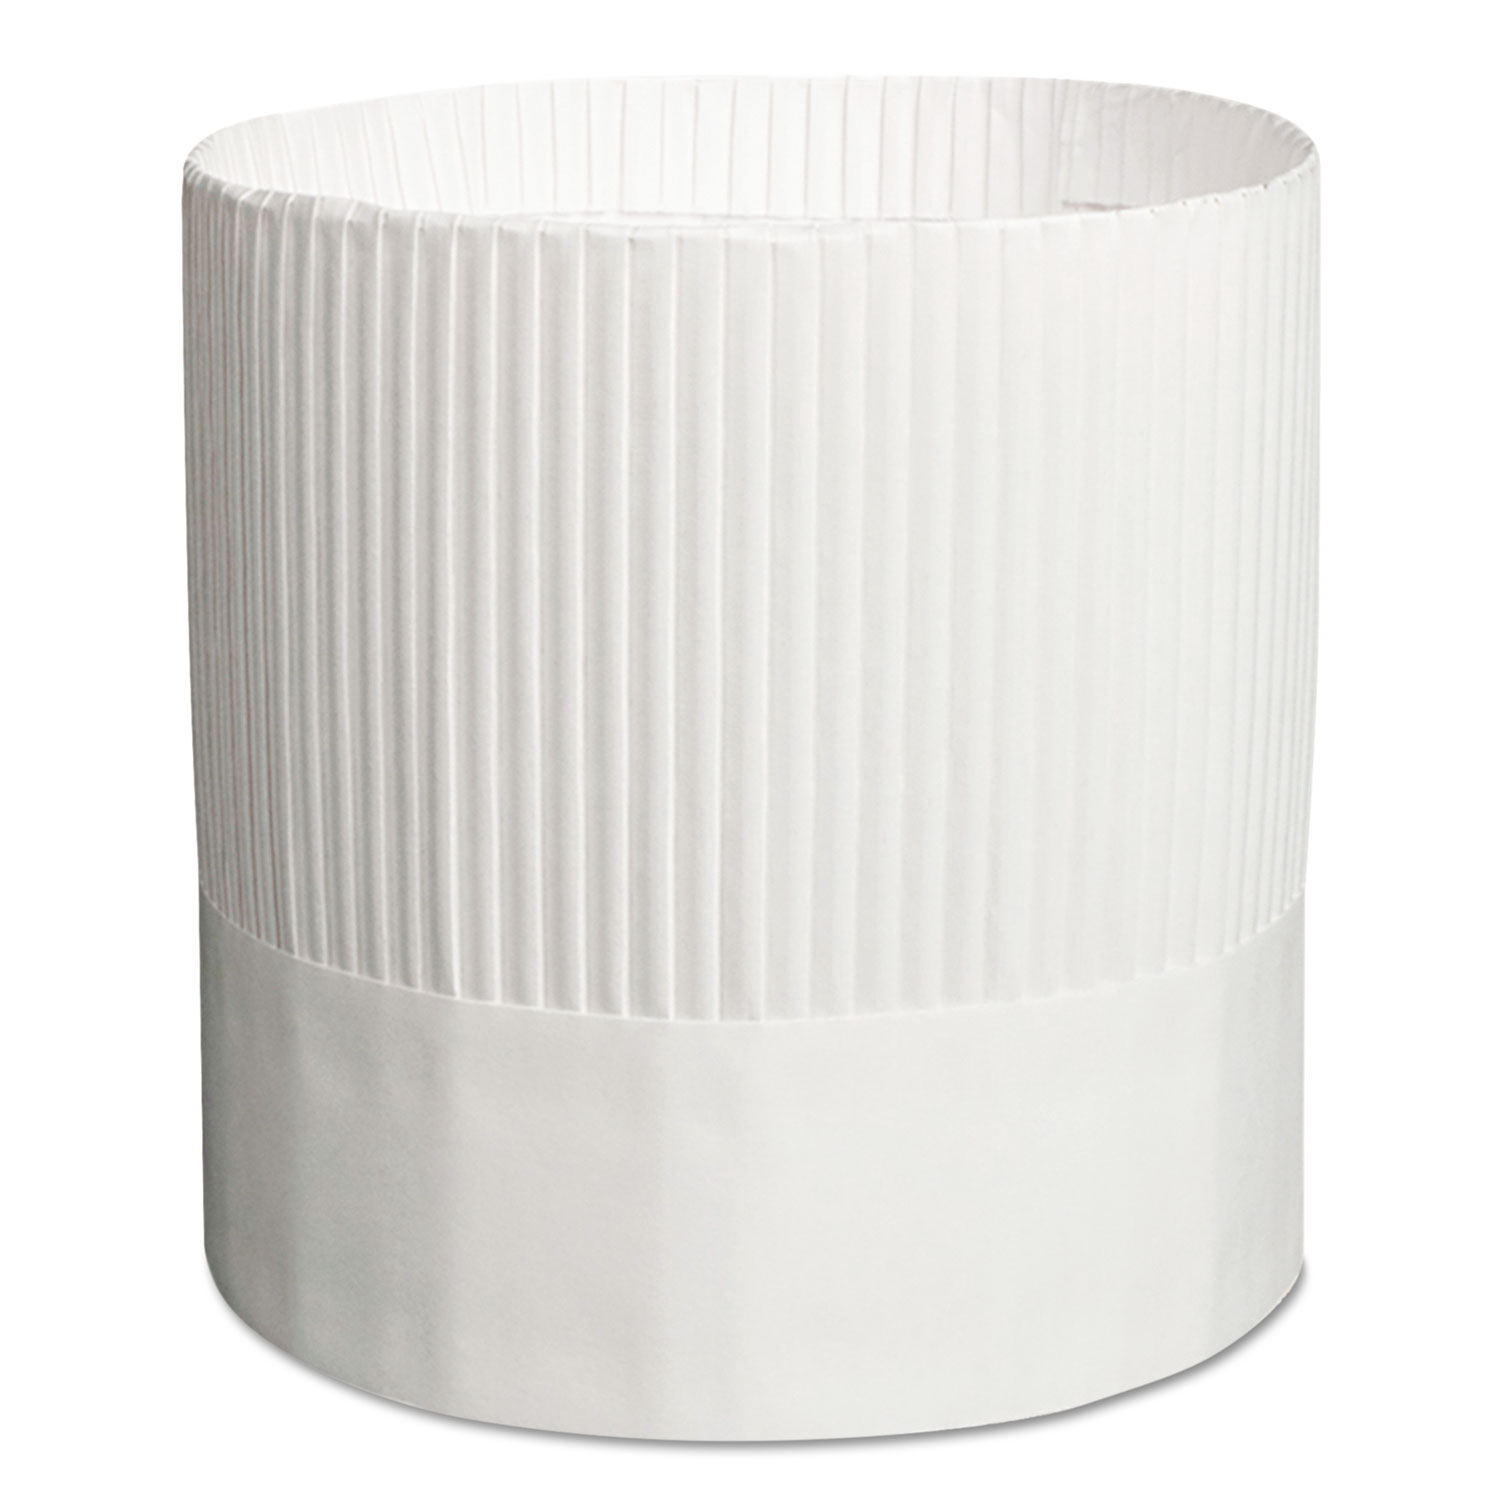 Stirling Fluted Chef's Hats, Paper, White, Adjustable, 7 in. Tall, 15/Carton